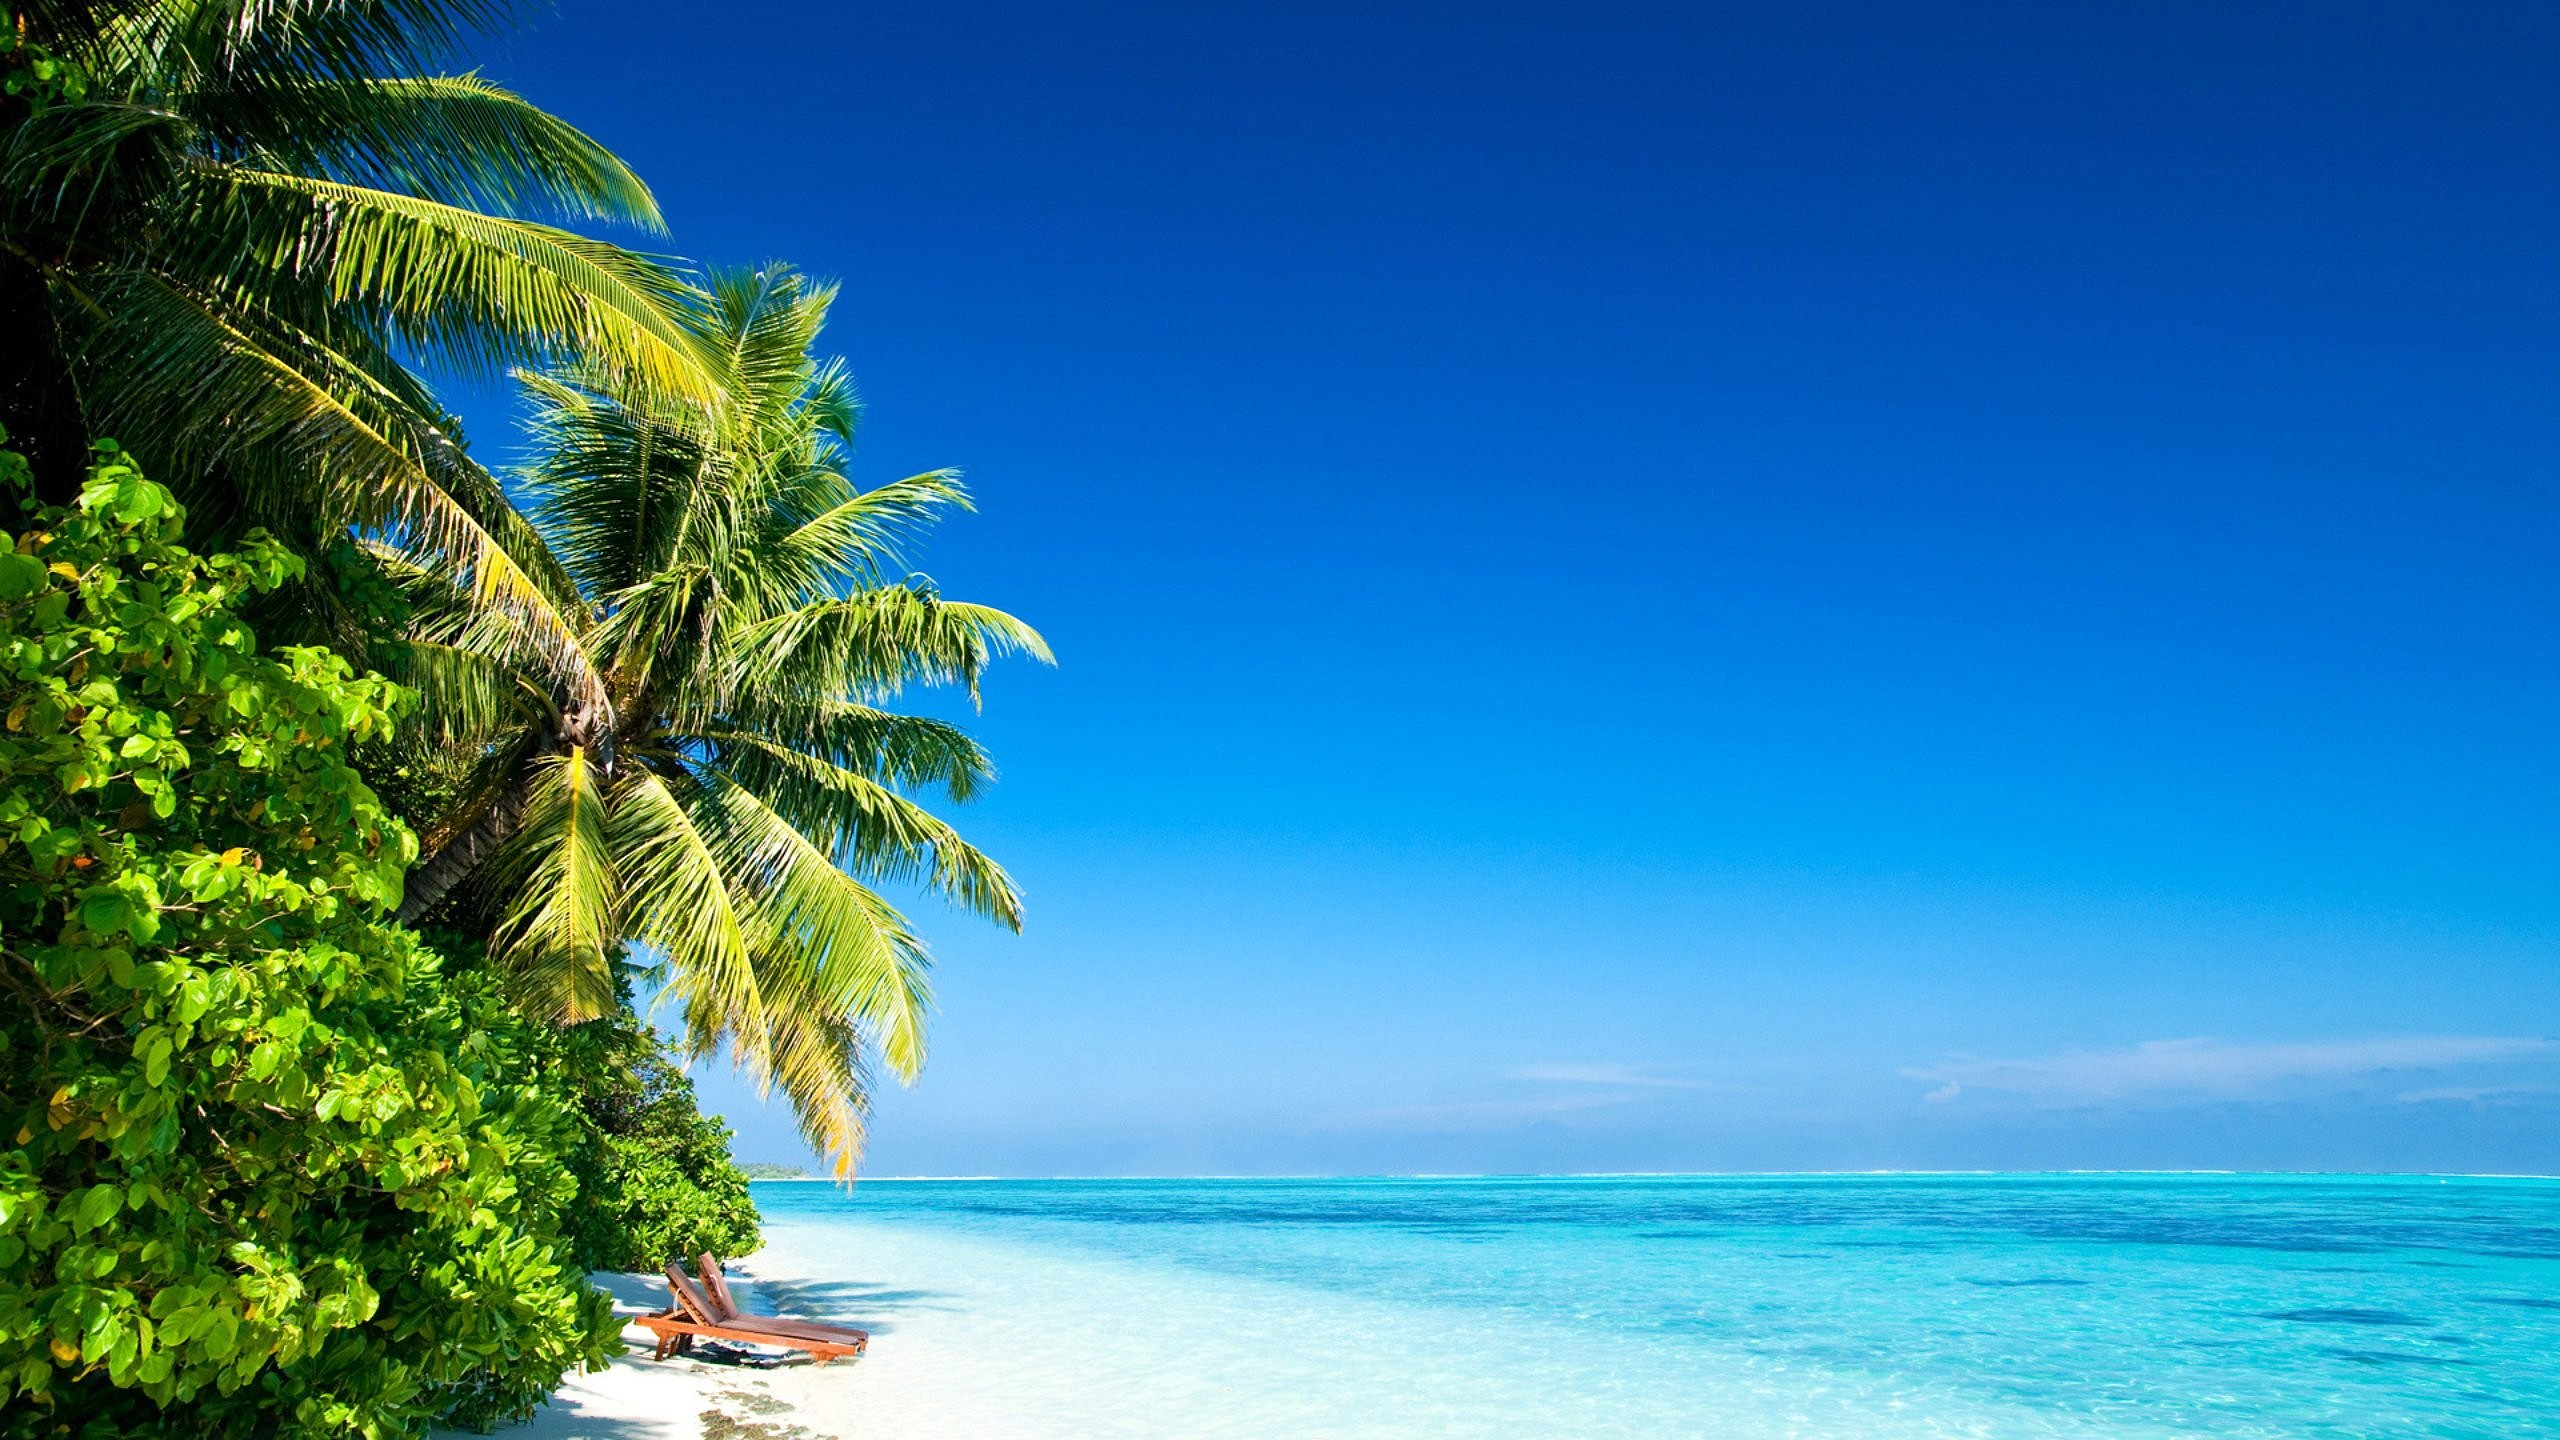 Ocean And Tropical Beach Wallpaper Tropical Beach Wallpapers, Pictures,
Images